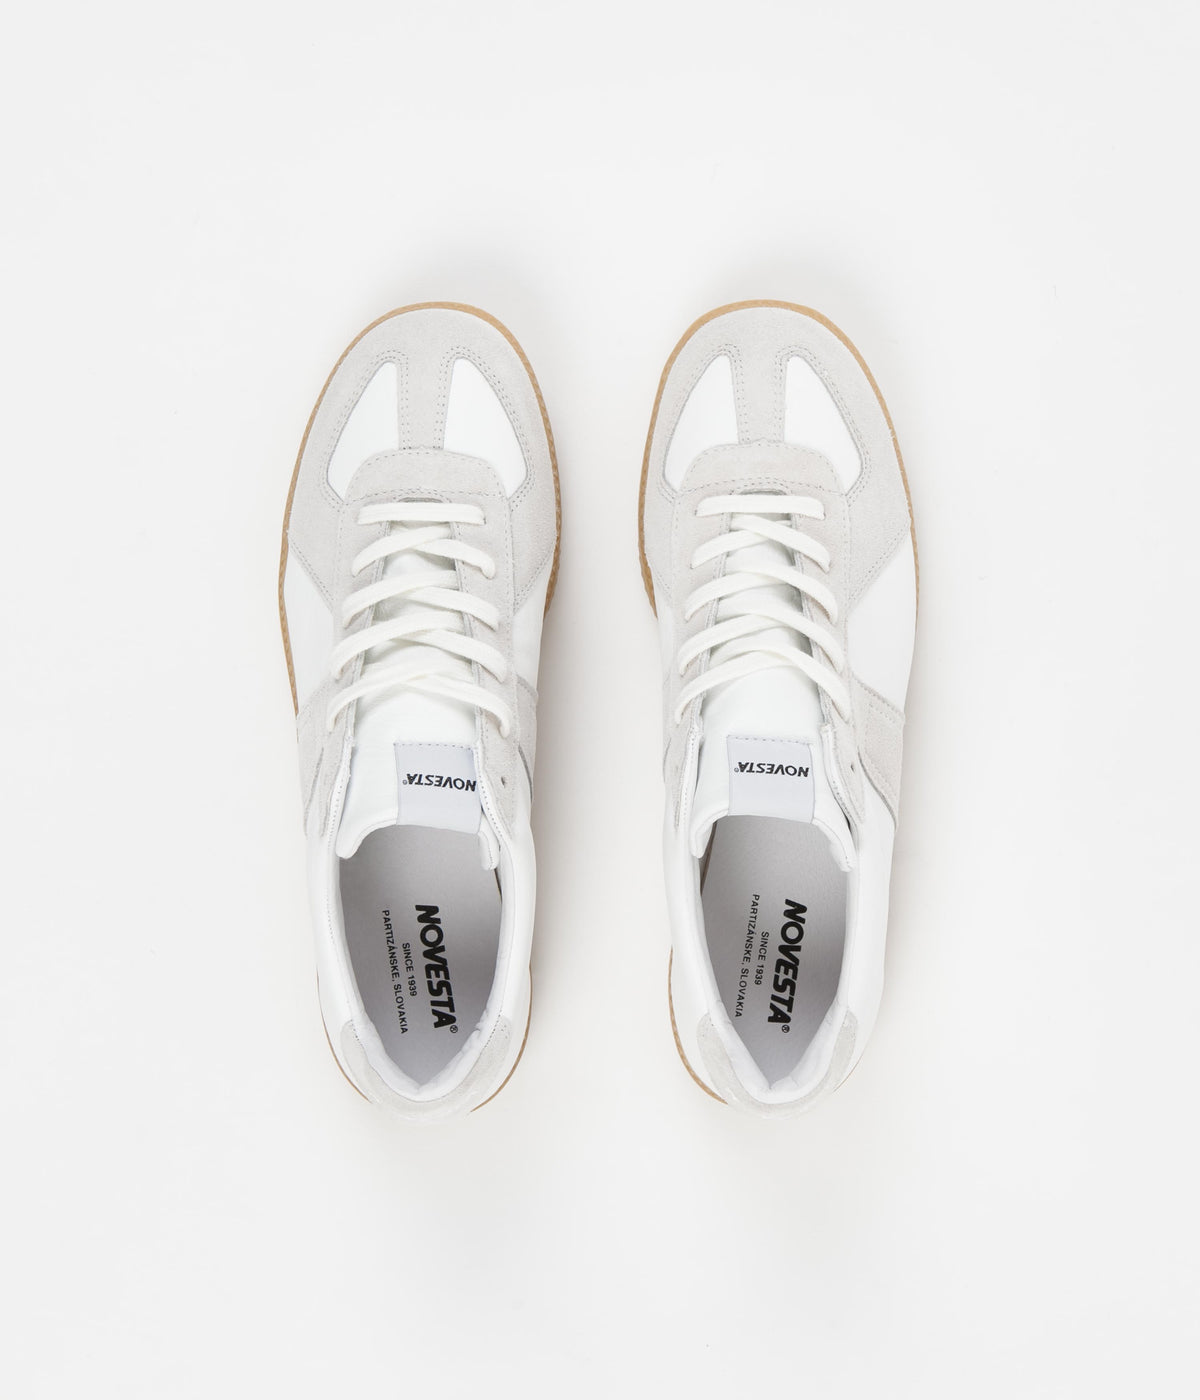 Novesta All Leather German Army Trainer Shoes - White / 003 Transparen ...